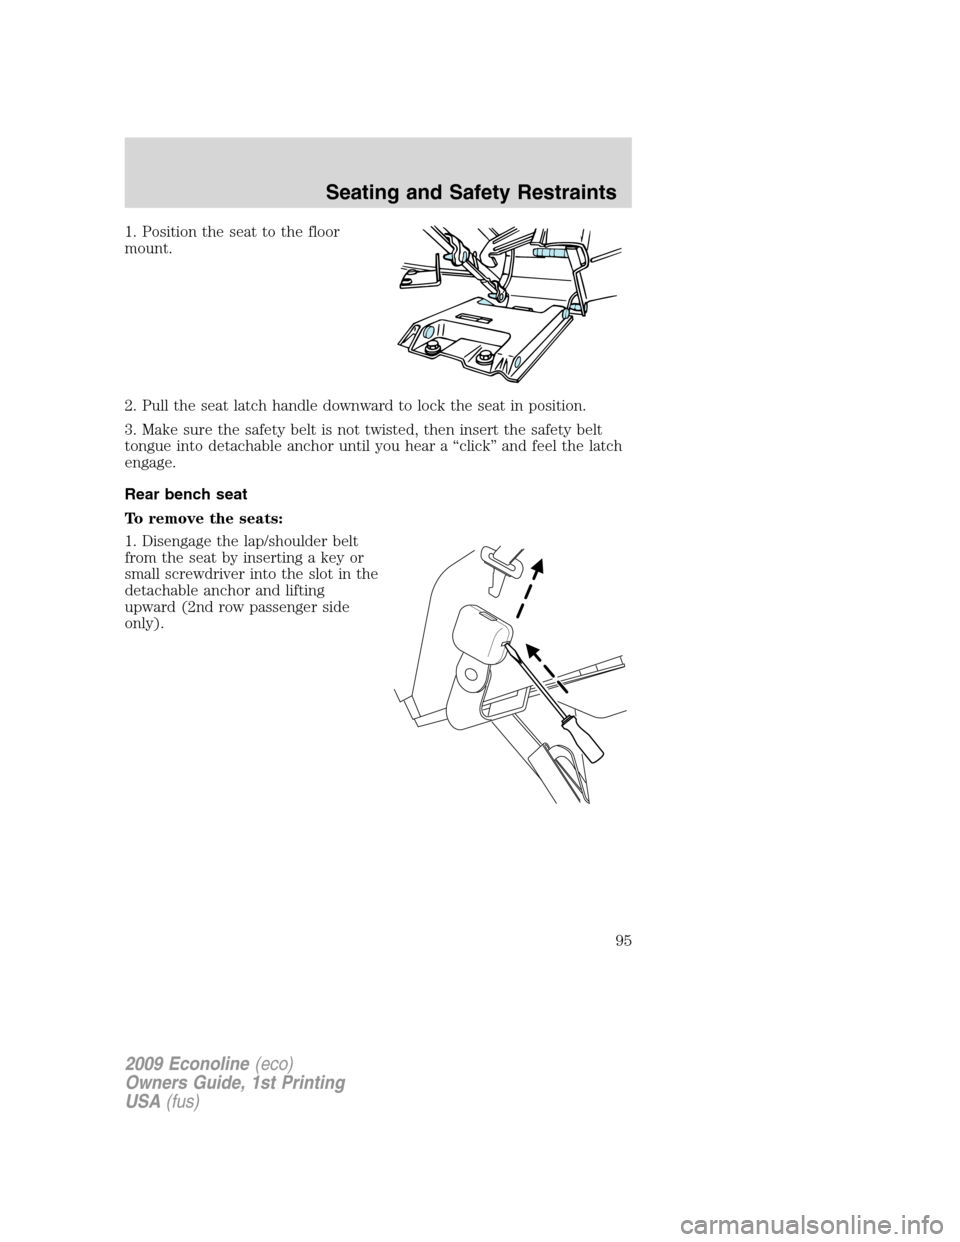 FORD E SERIES 2009 4.G Owners Manual 1. Position the seat to the floor
mount.
2. Pull the seat latch handle downward to lock the seat in position.
3. Make sure the safety belt is not twisted, then insert the safety belt
tongue into detac